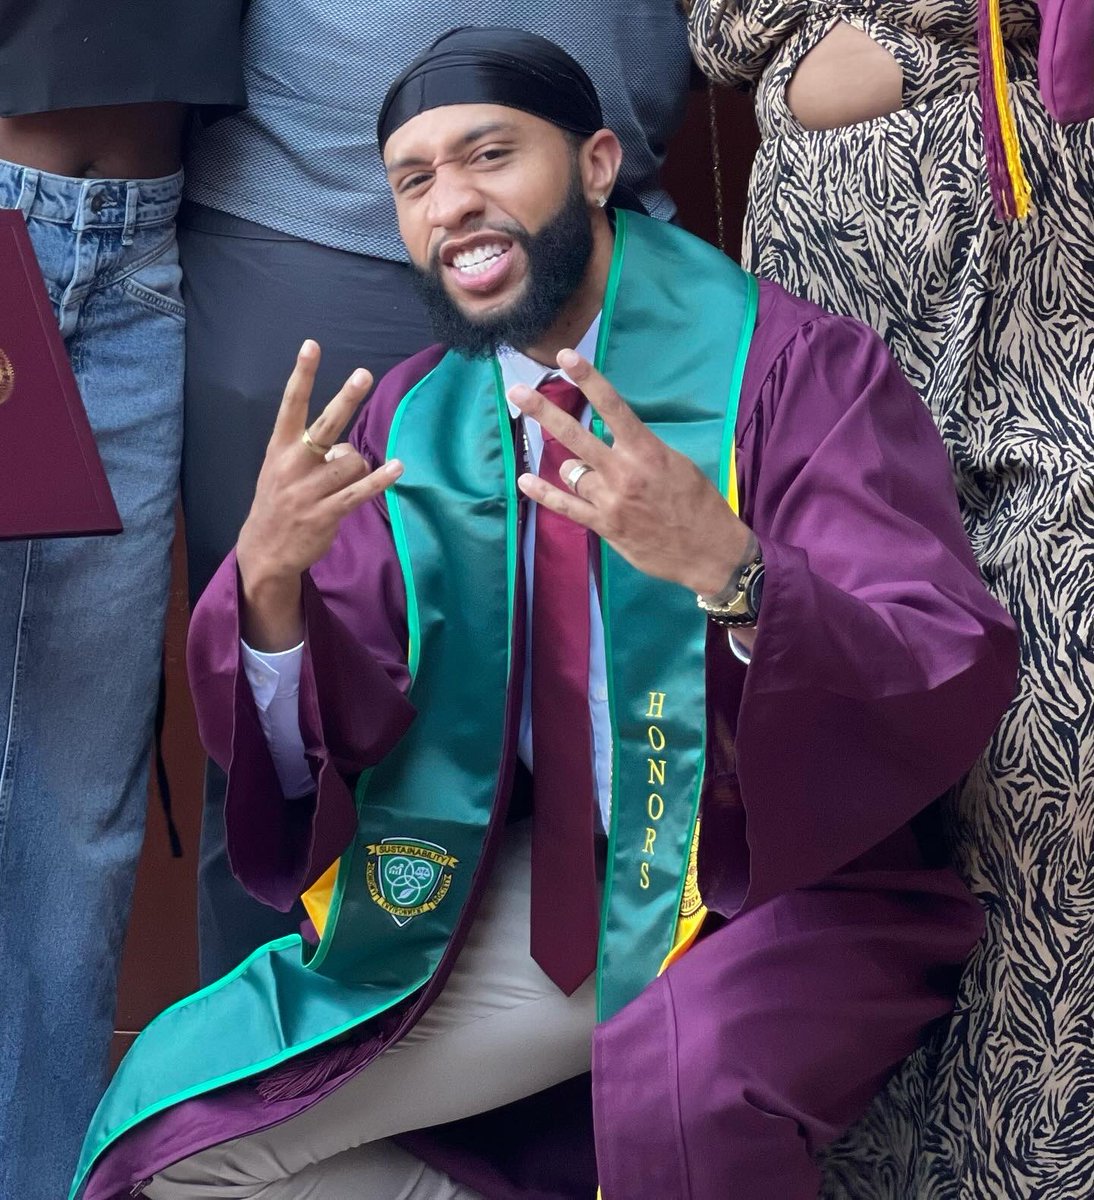 Yall mind if i post a lil #tbt ? Always wanted to post this picture had to wait till i get a job first 😅😂 #graduationseason #ASU #mastersloading 📚🎓